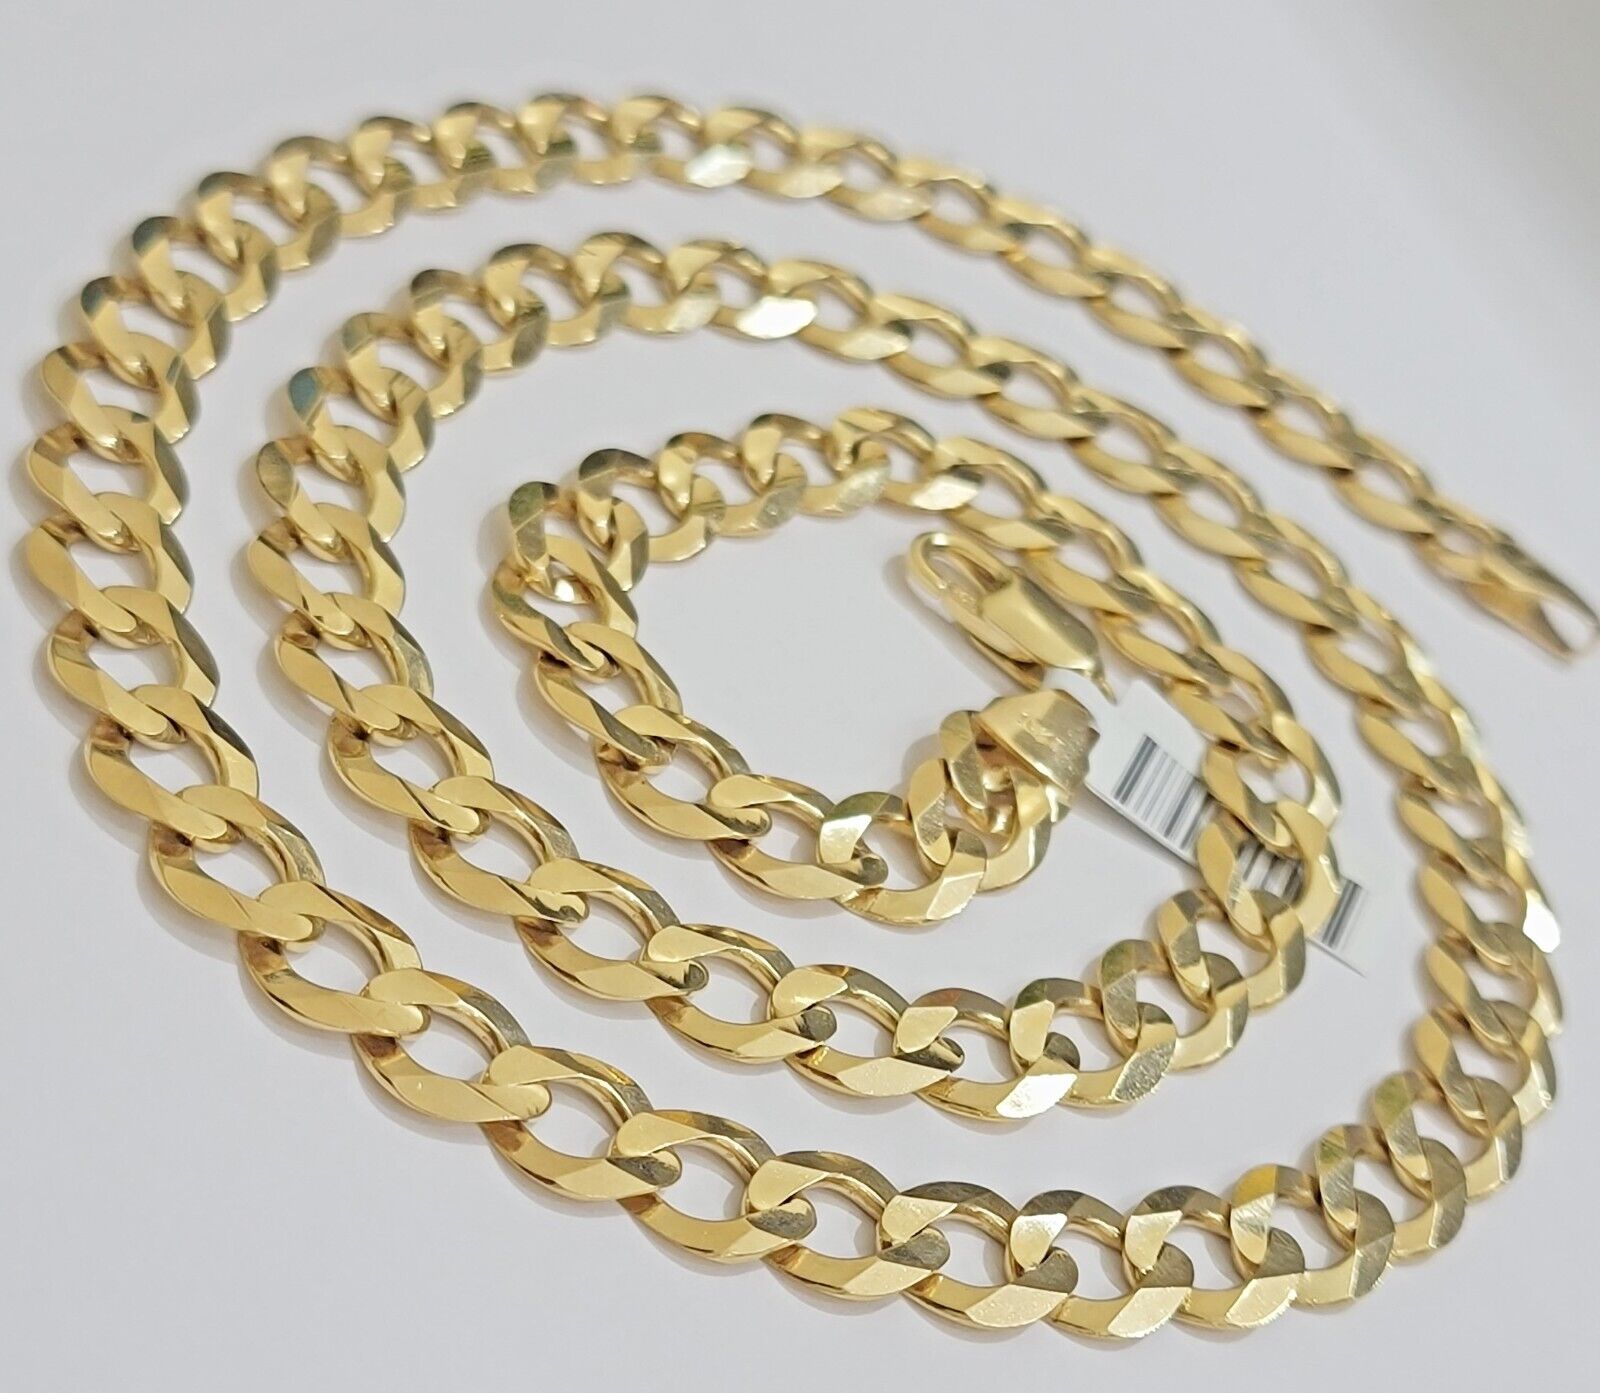 9ct Yellow Gold CURB CHAIN Necklace 14mm Wide - 163gr 24” MENS BRAND NEW